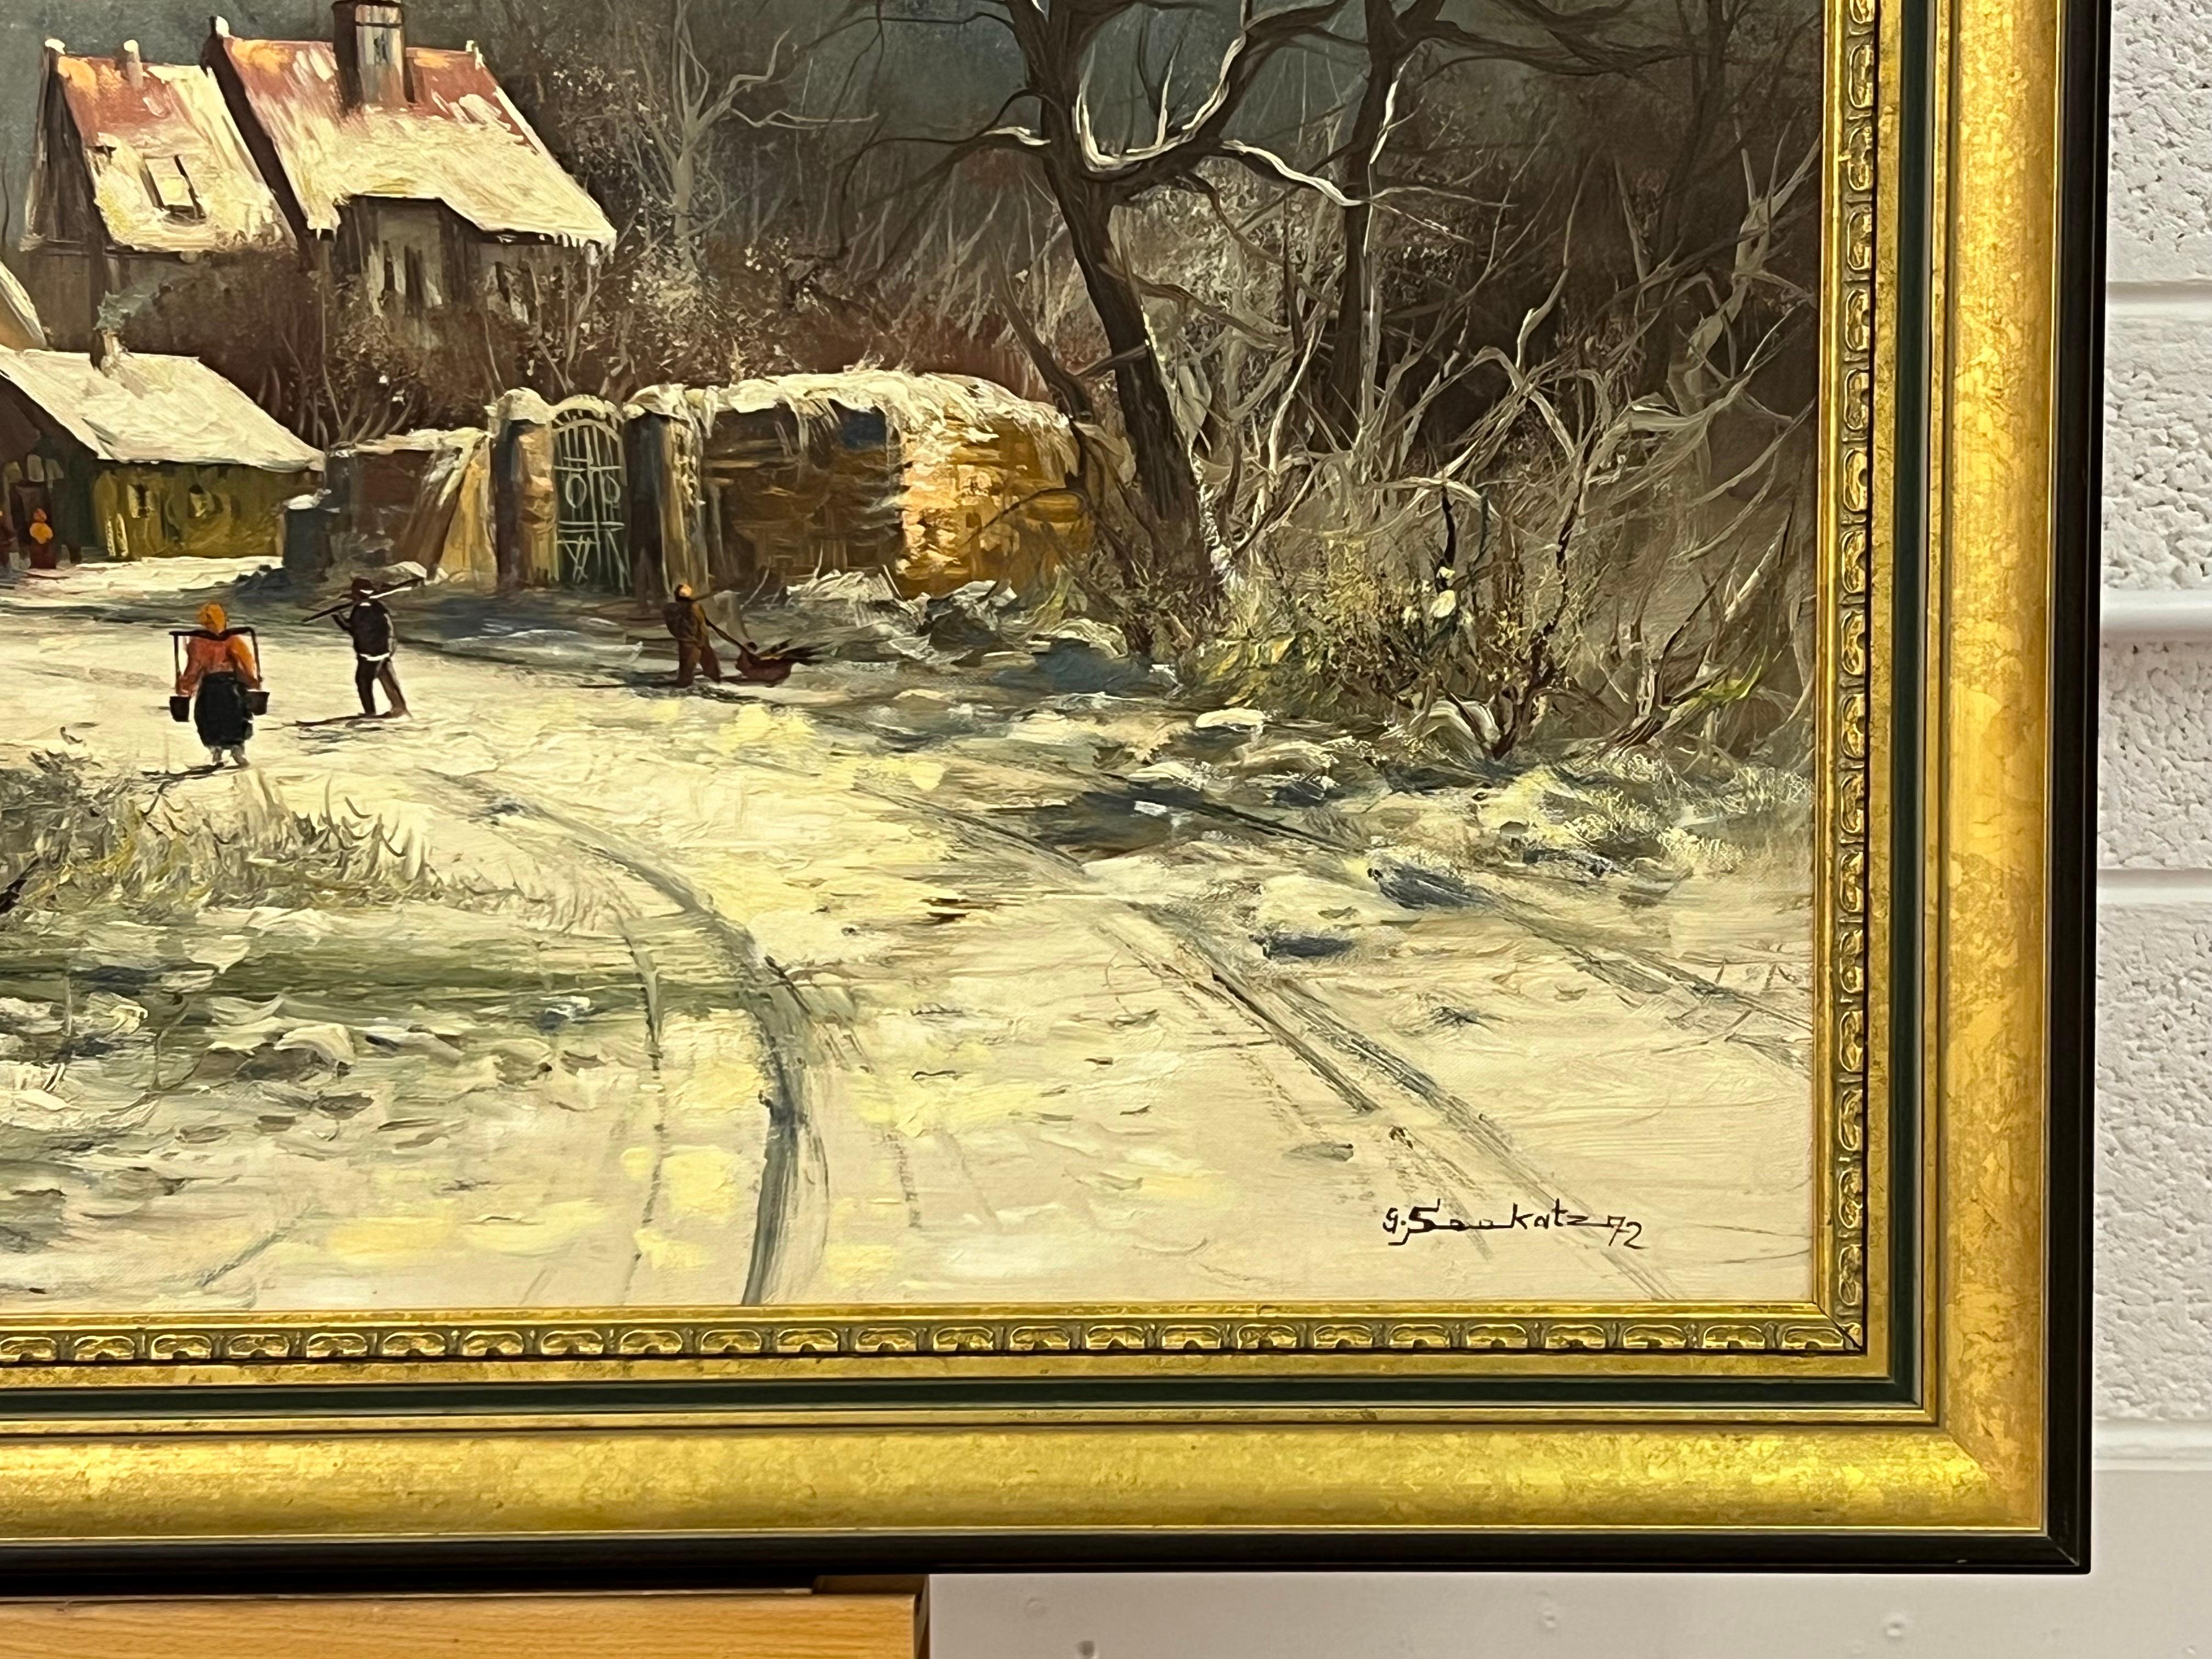 European Village in Winter Snow with Figures & Frozen Pond by 20th Century German Artist, Gunter Seekatz. This is a large painting measuring almost 4 feet wide. 

Art measures 40 x 29.5 inches 
Frame measures 46 x 35 inches 

Gunter Seekatz (German,